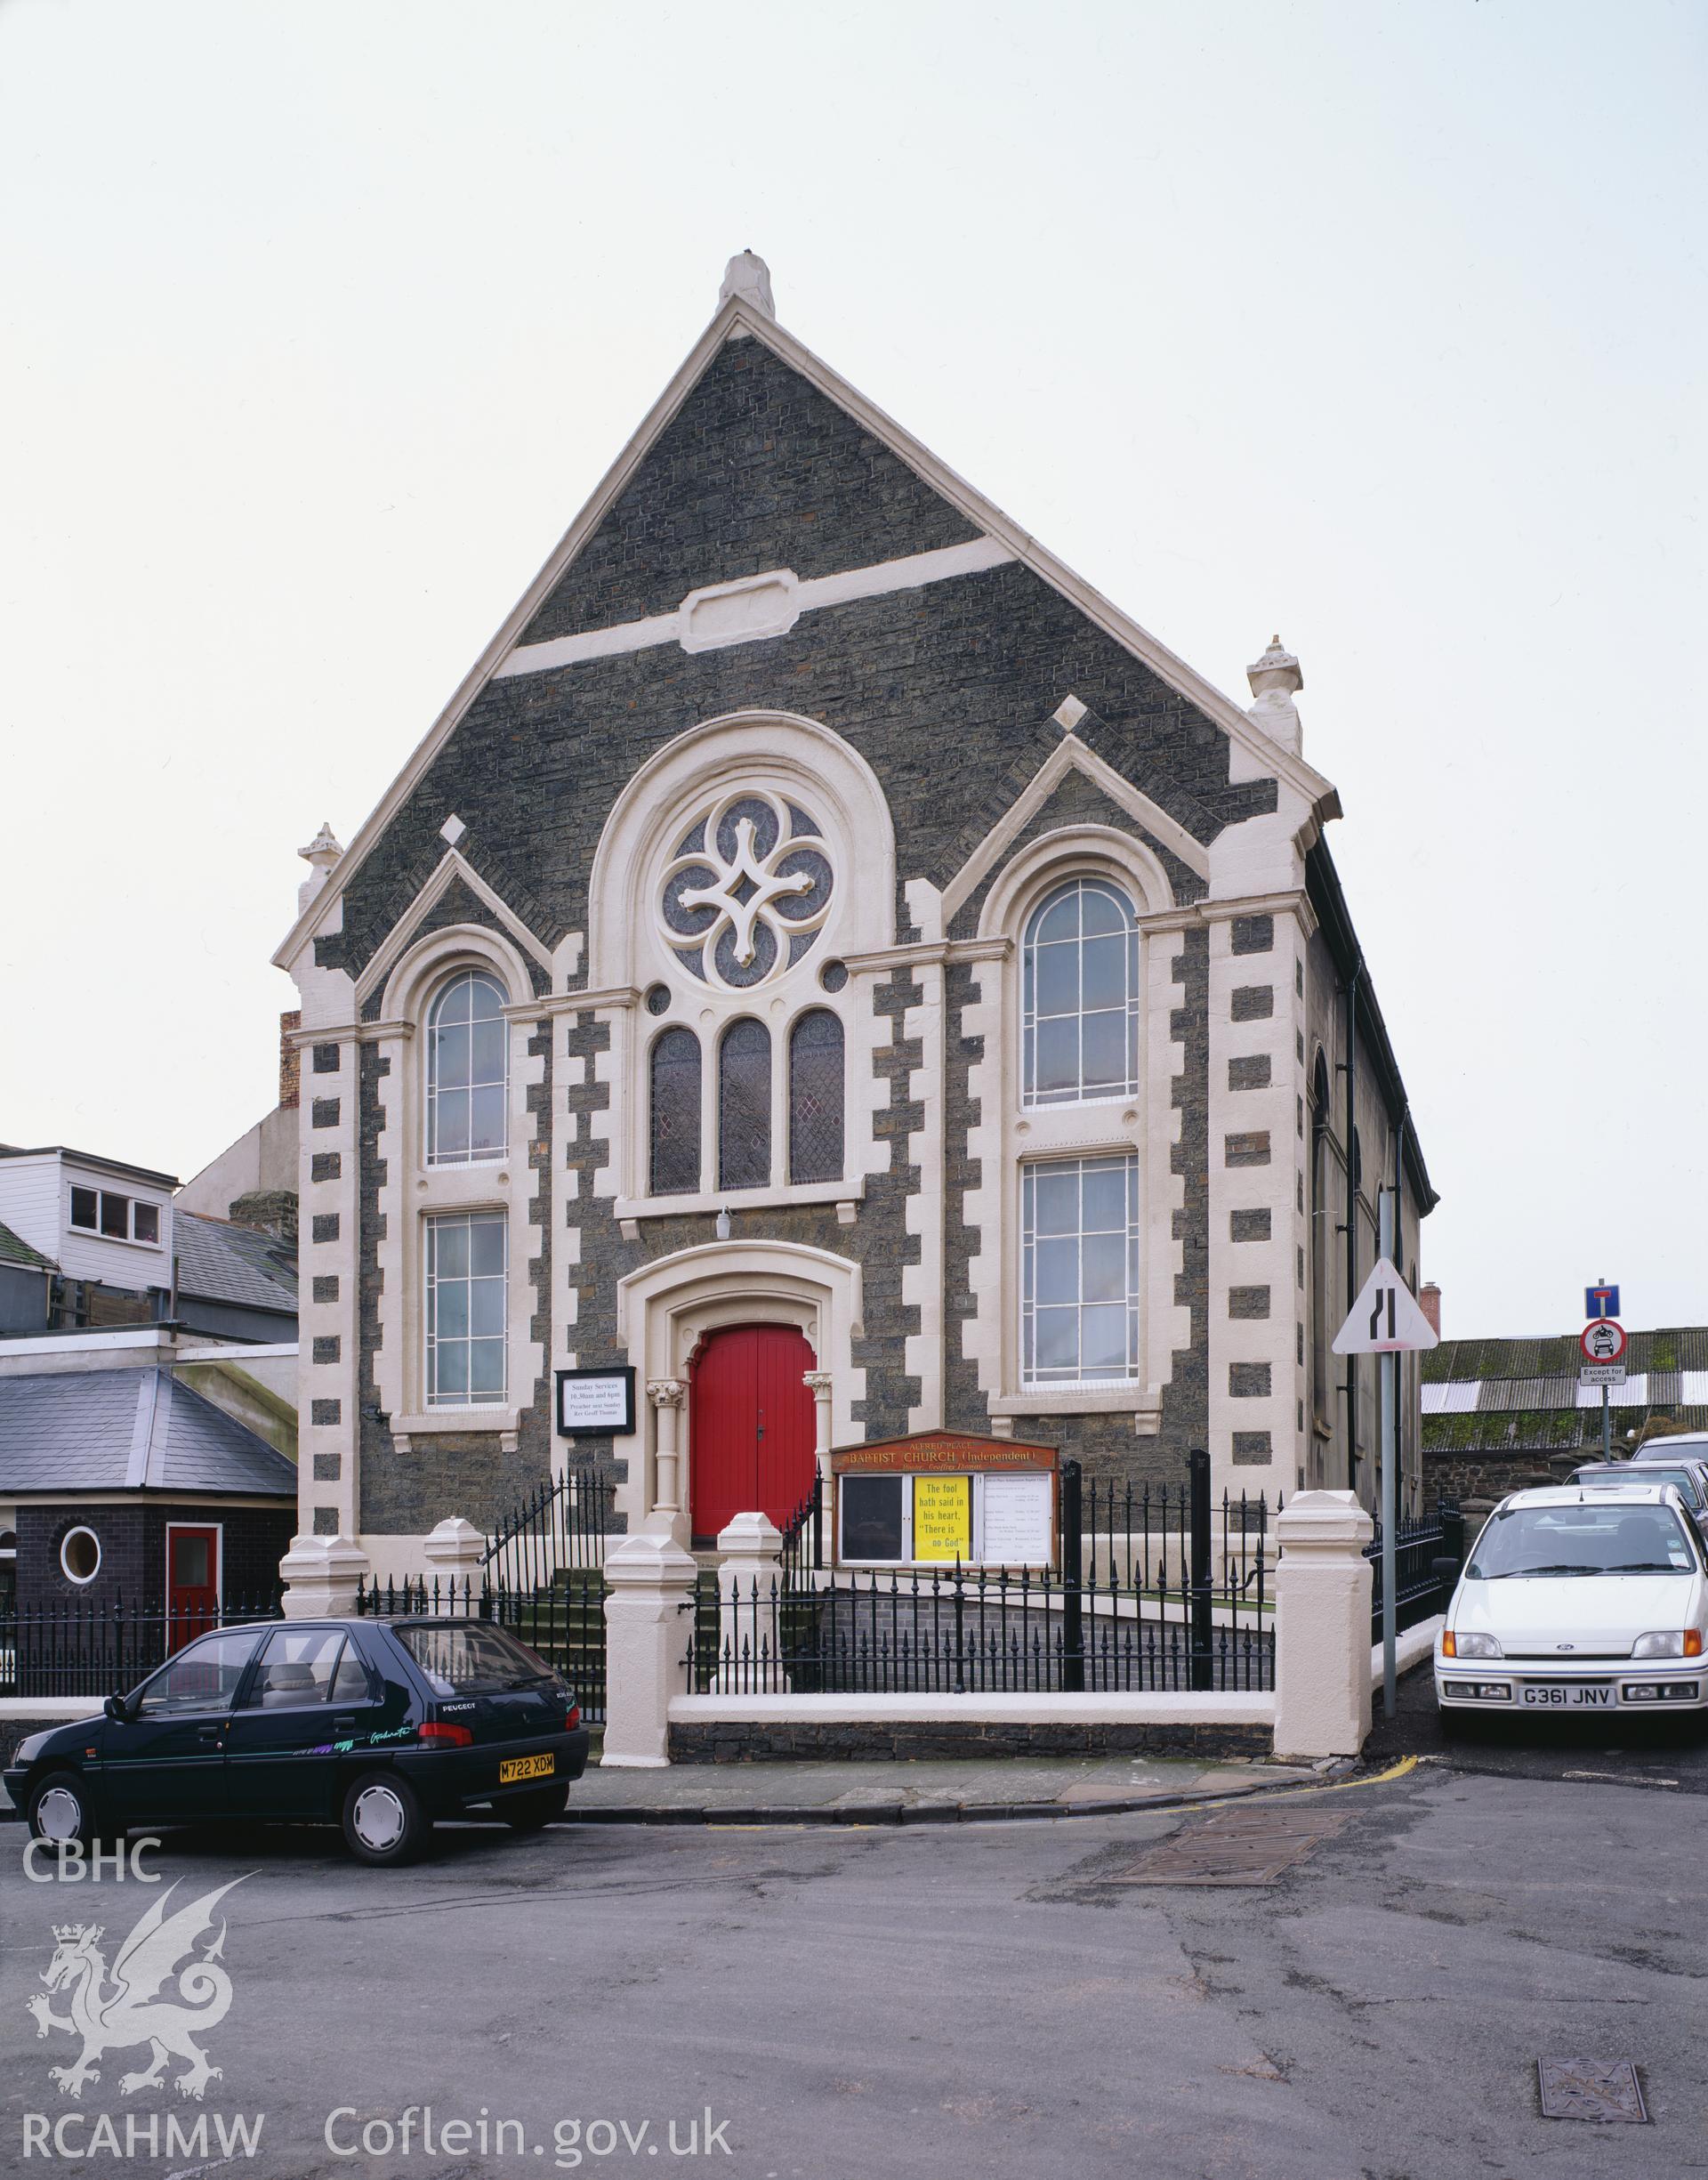 RCAHMW colour transparency showing the English Baptist Church, Aberystwyth taken by I.N. Wright, 1997